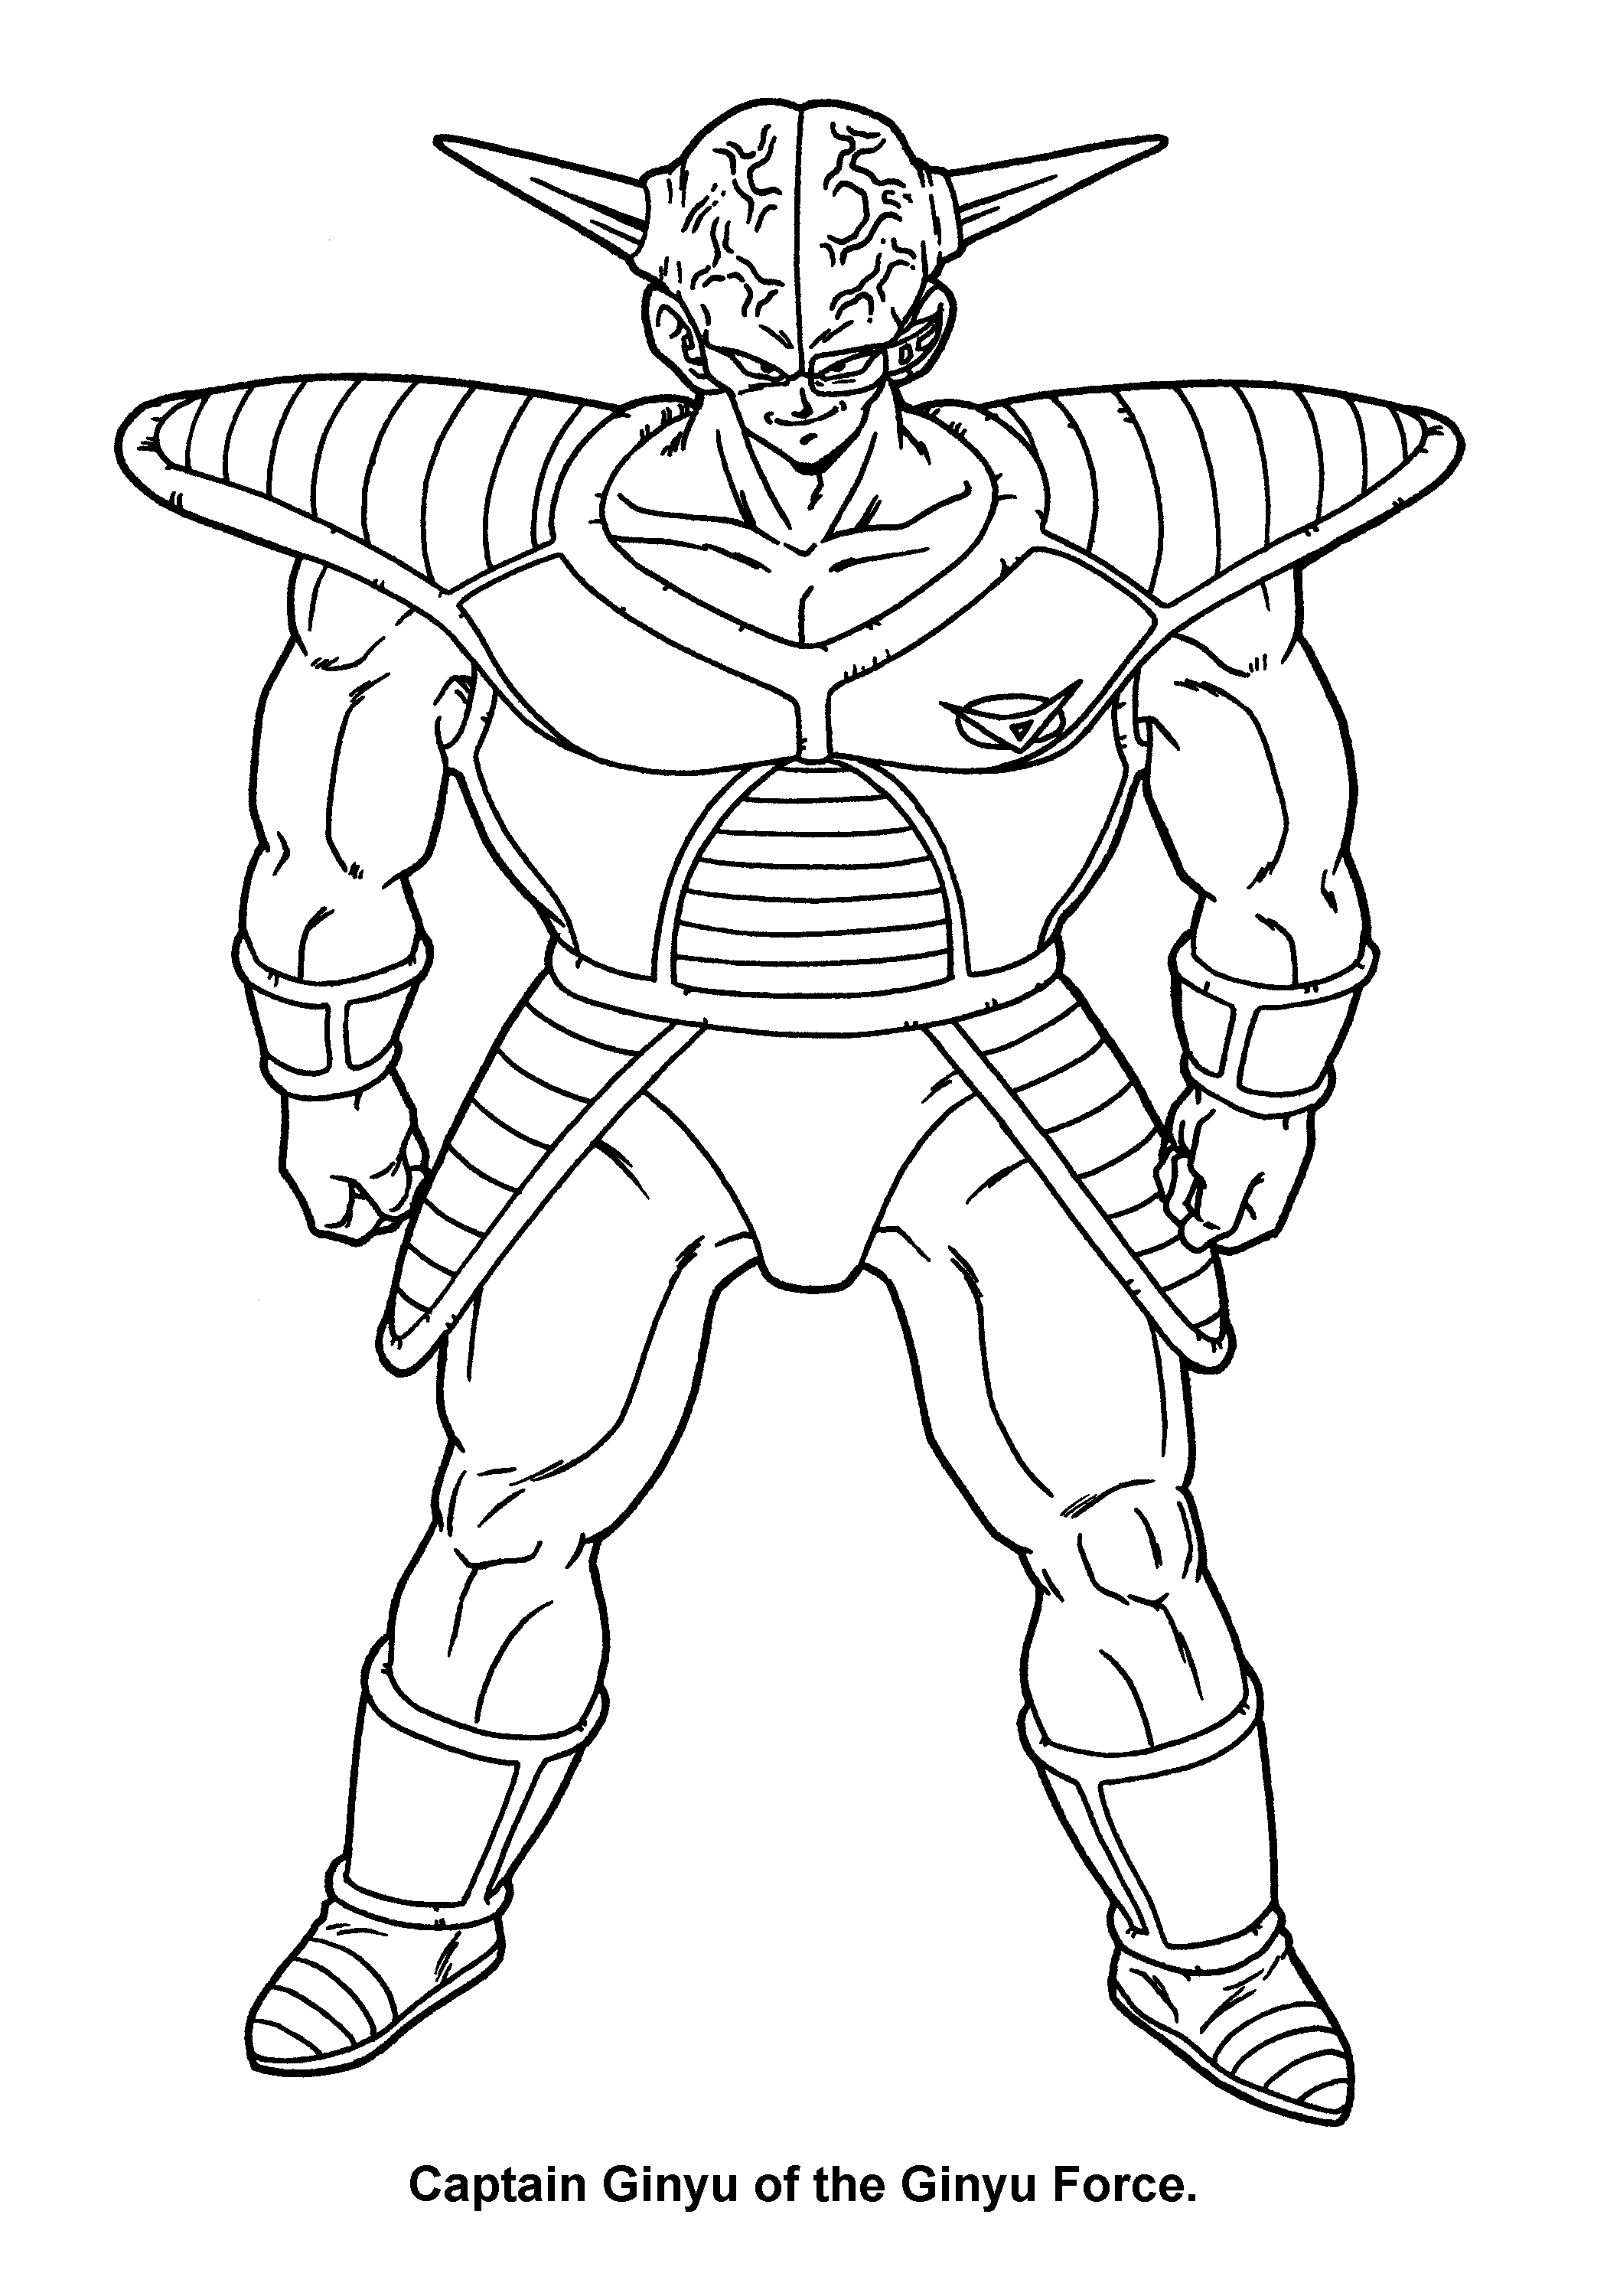 Dragon ball z Coloring Pages